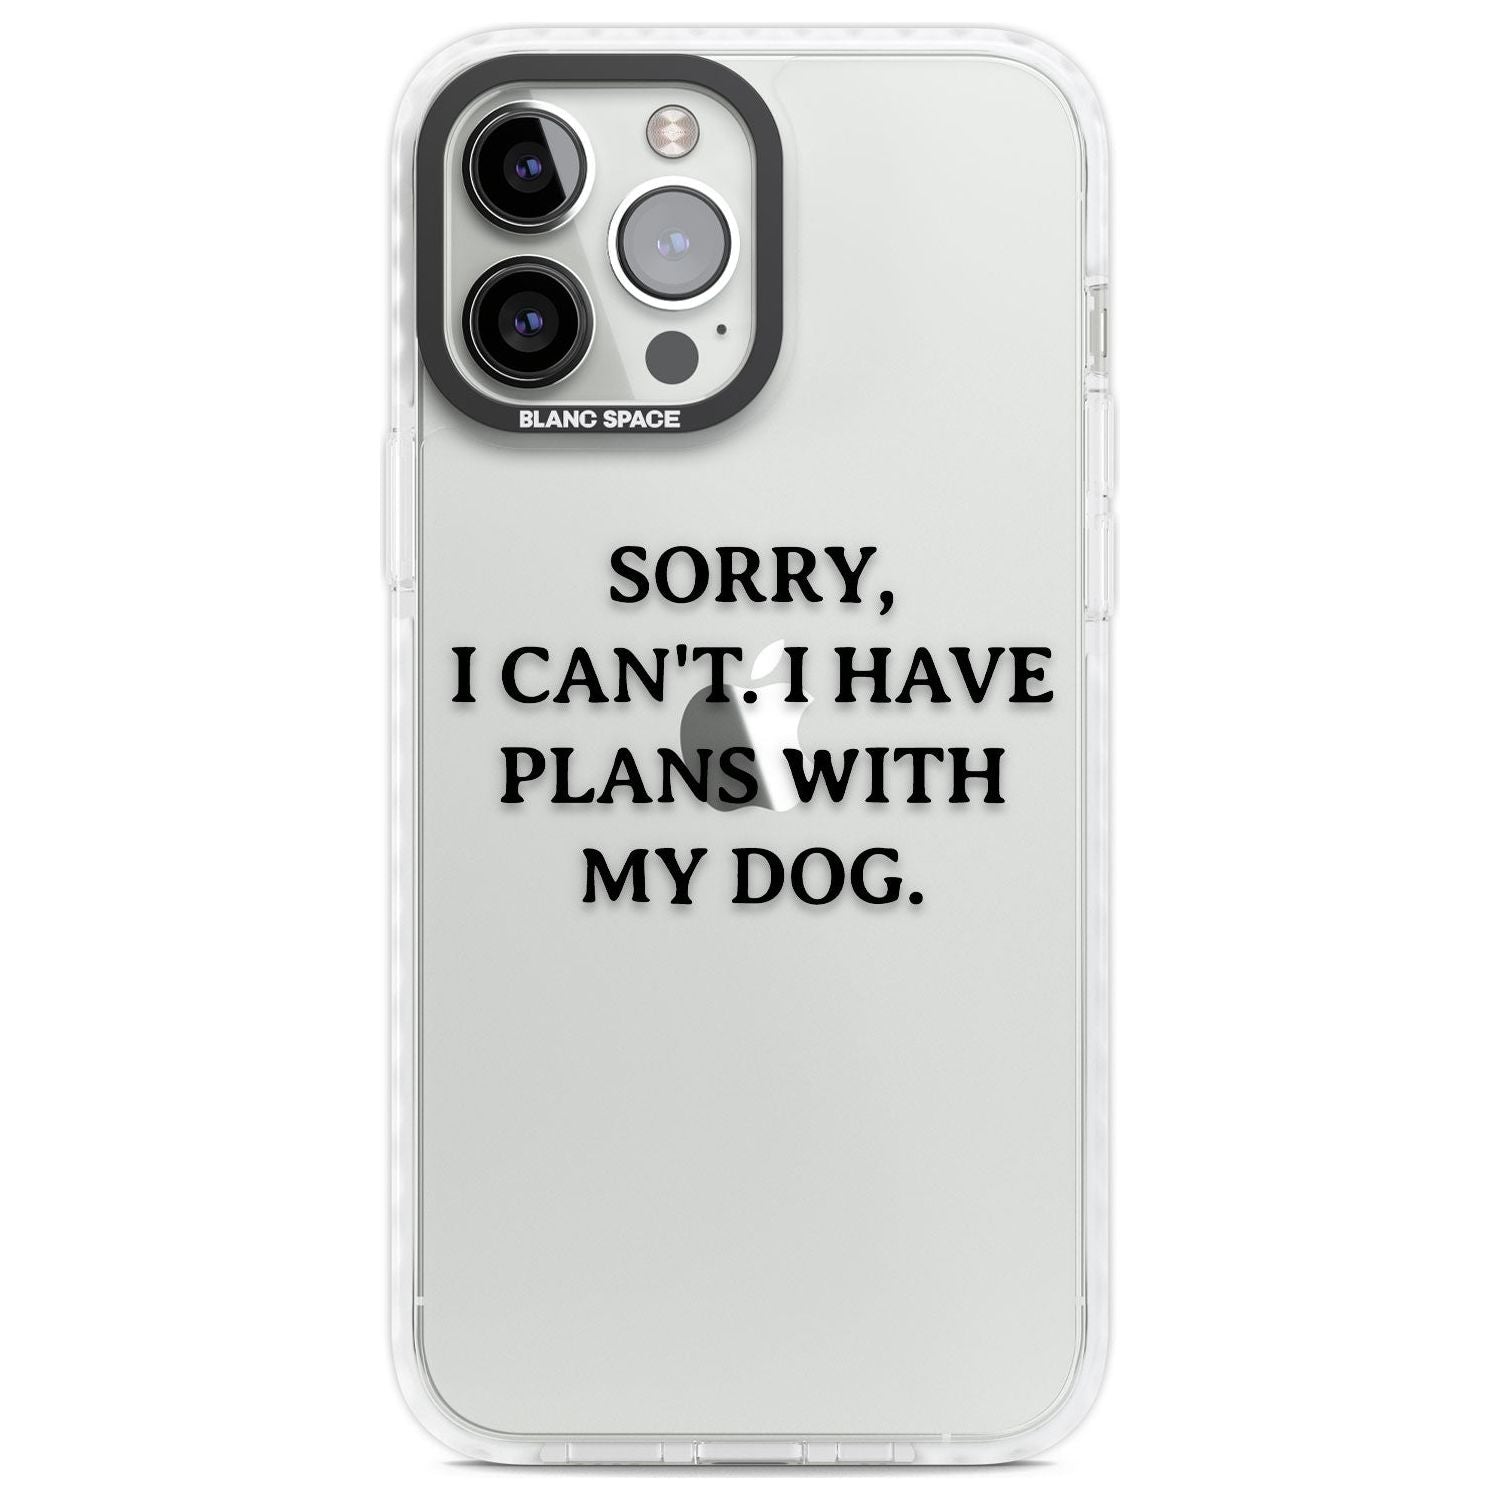 I Have Plans With My Dog Phone Case iPhone 13 Pro Max / Impact Case,iPhone 14 Pro Max / Impact Case Blanc Space